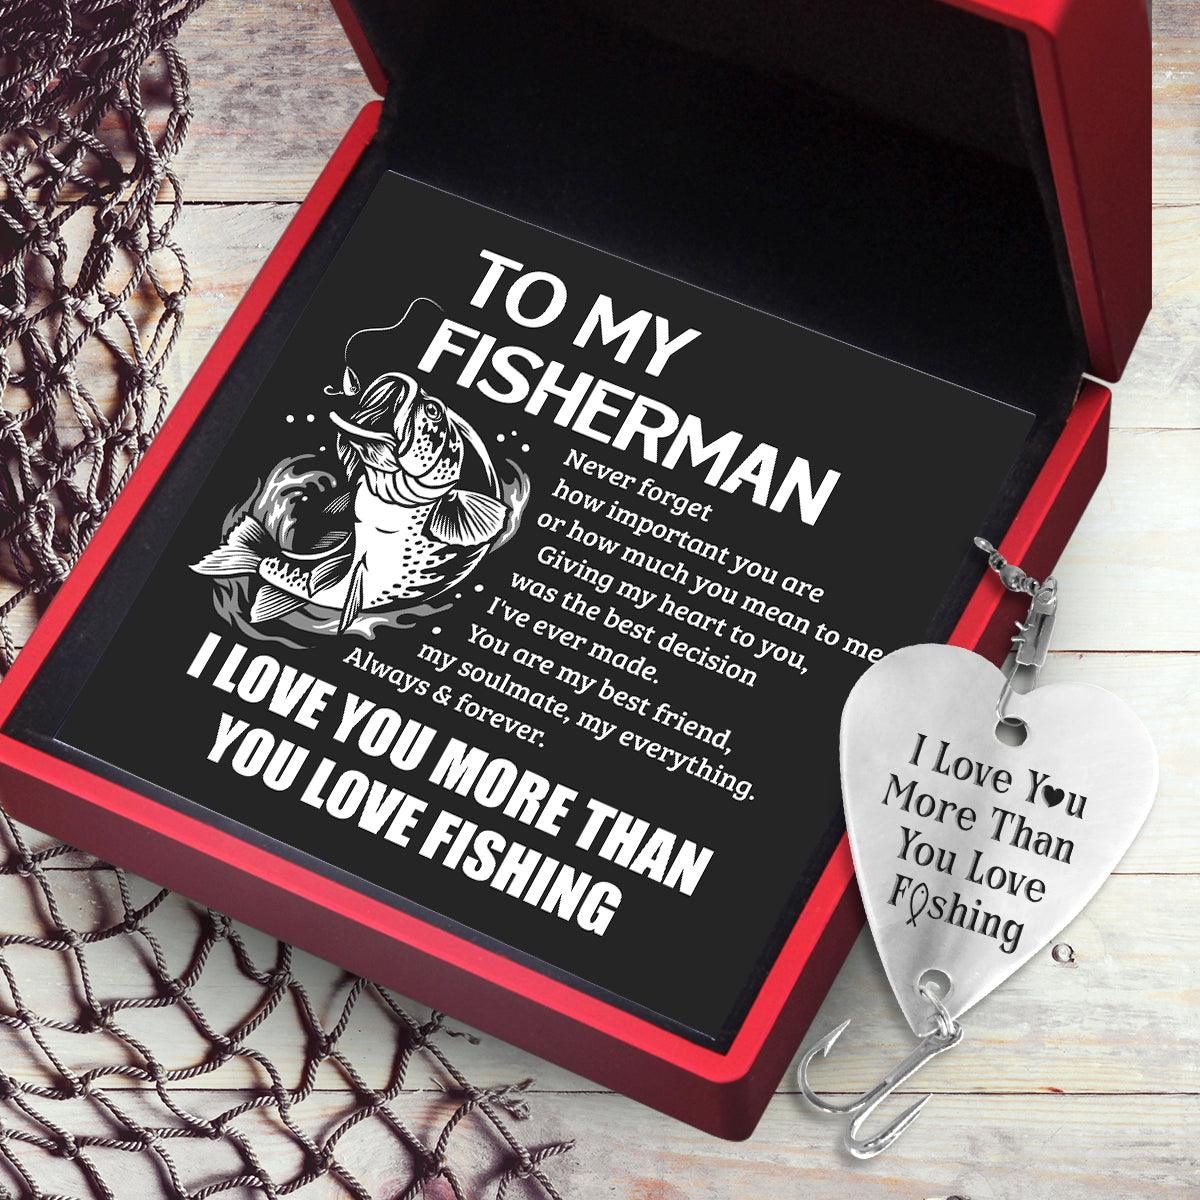 Fishing Lures - Fishing - To My Boyfriend - You Are My Best Friend, My -  Wrapsify